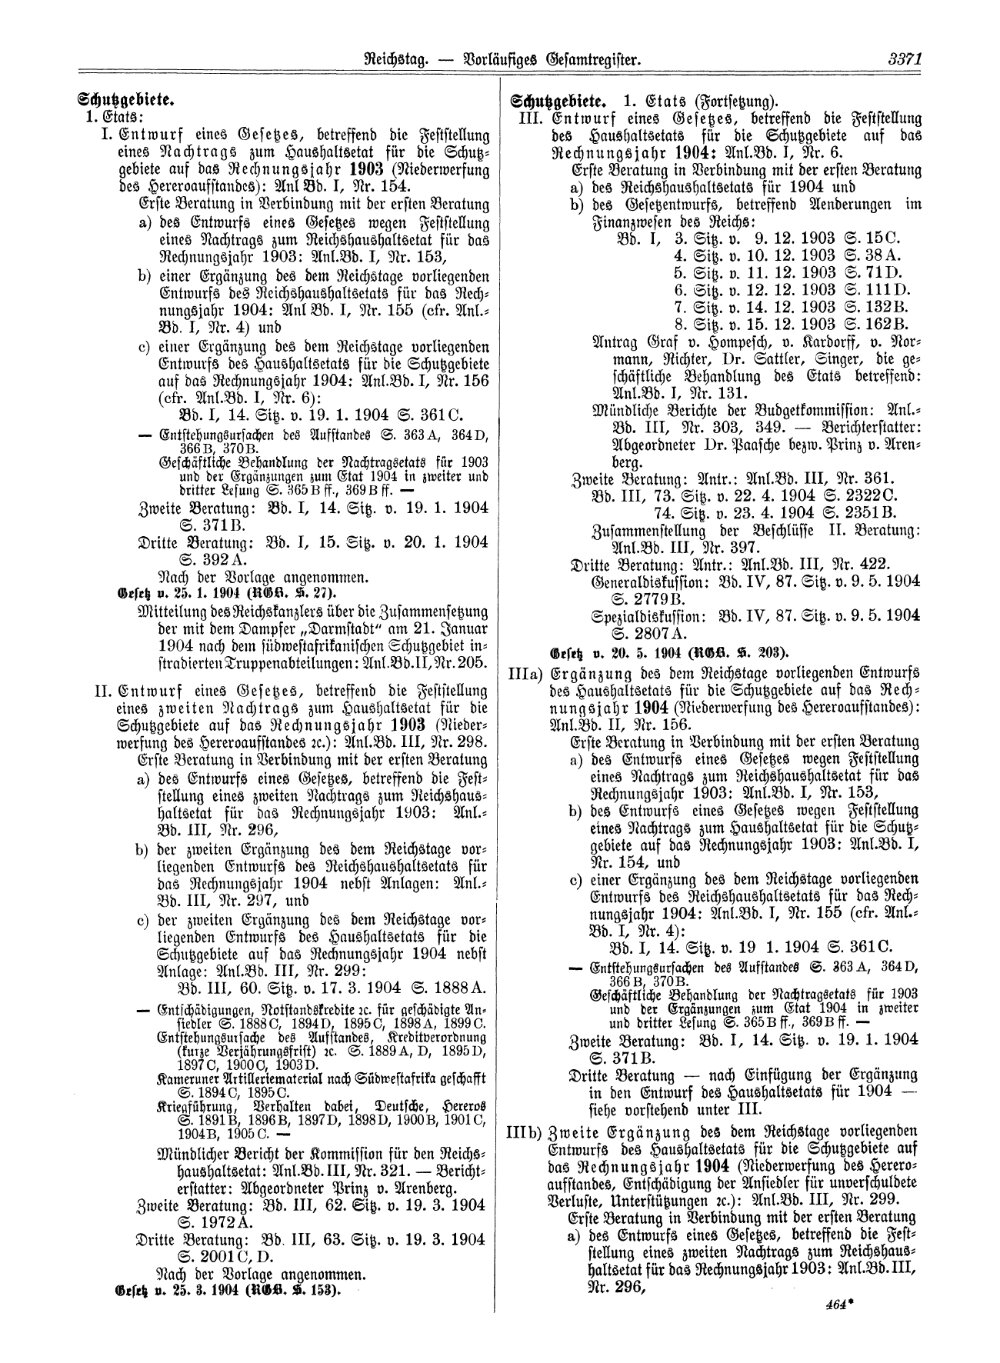 Scan of page 3371